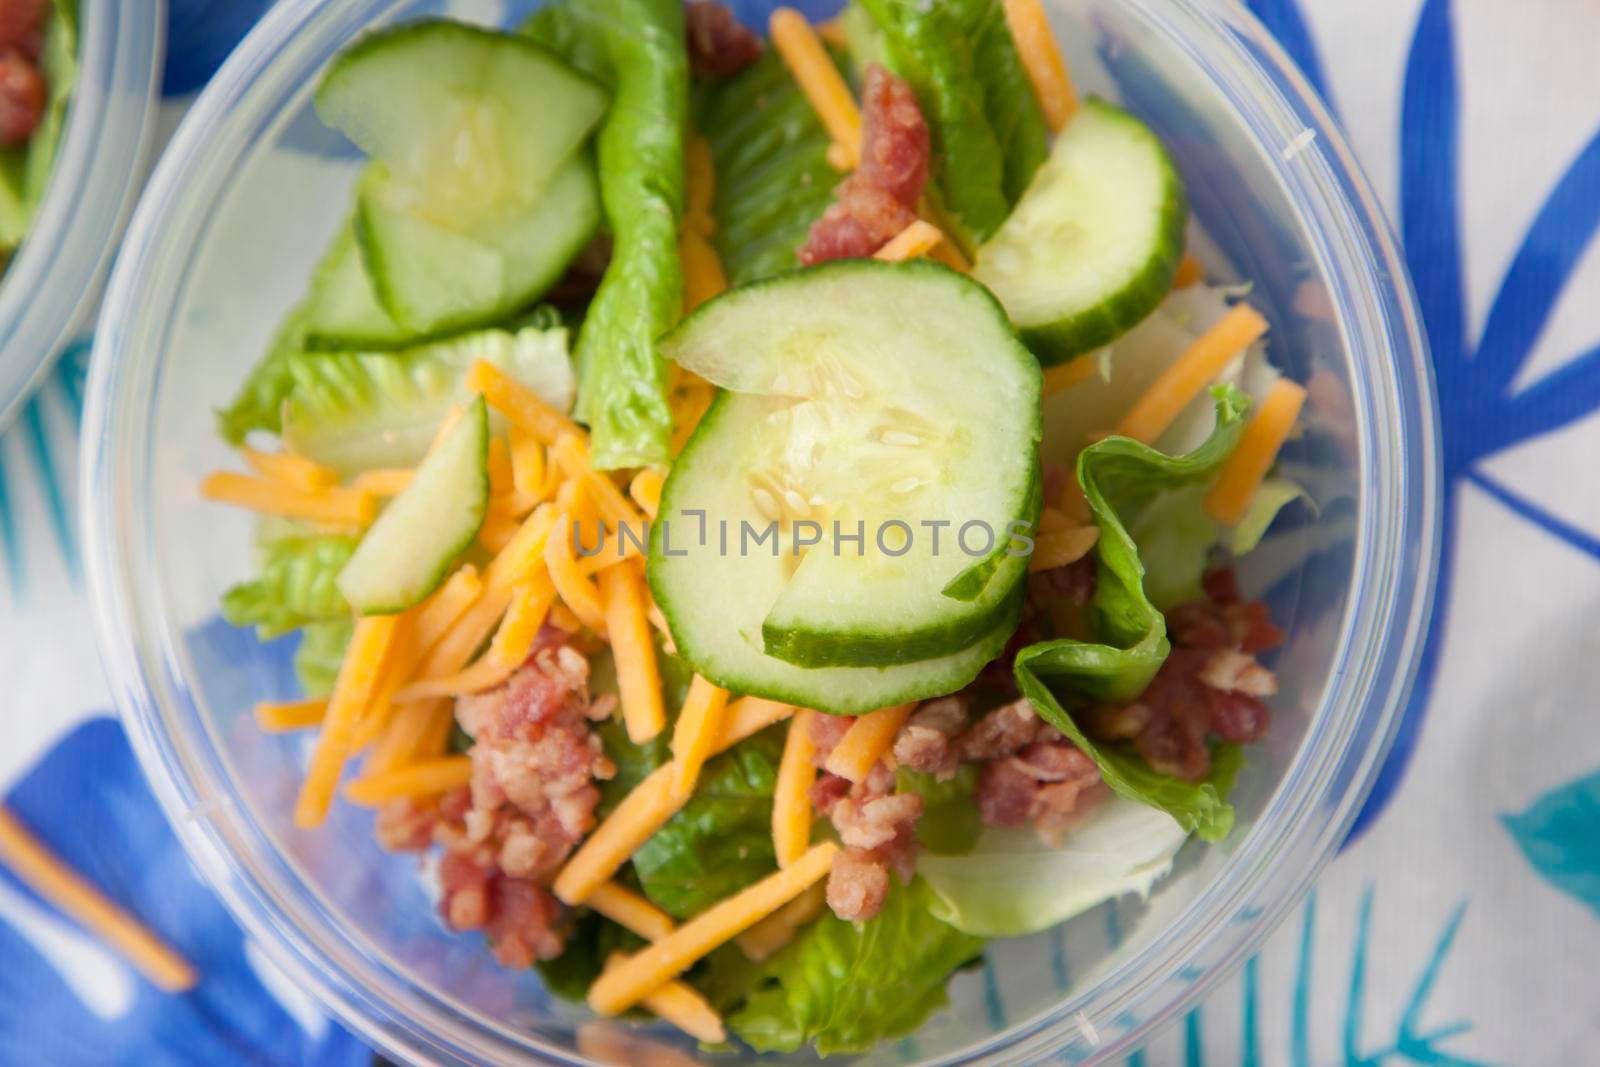 Plastic dish with salad, bacon, cheese and cucumbers 